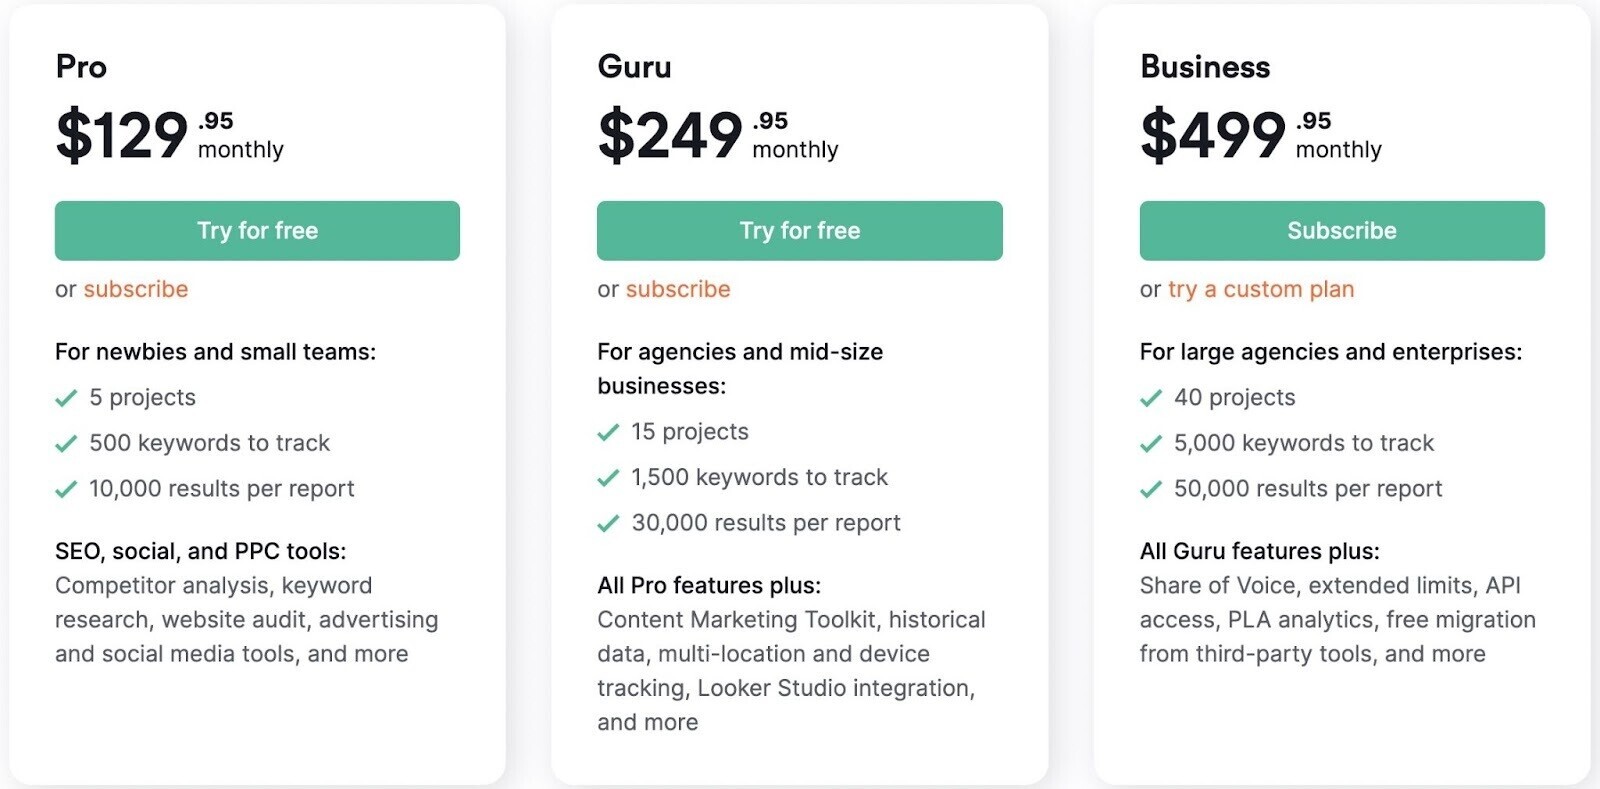 Semrush’s paid plans page showing prices for Pro, Guru and Business plan